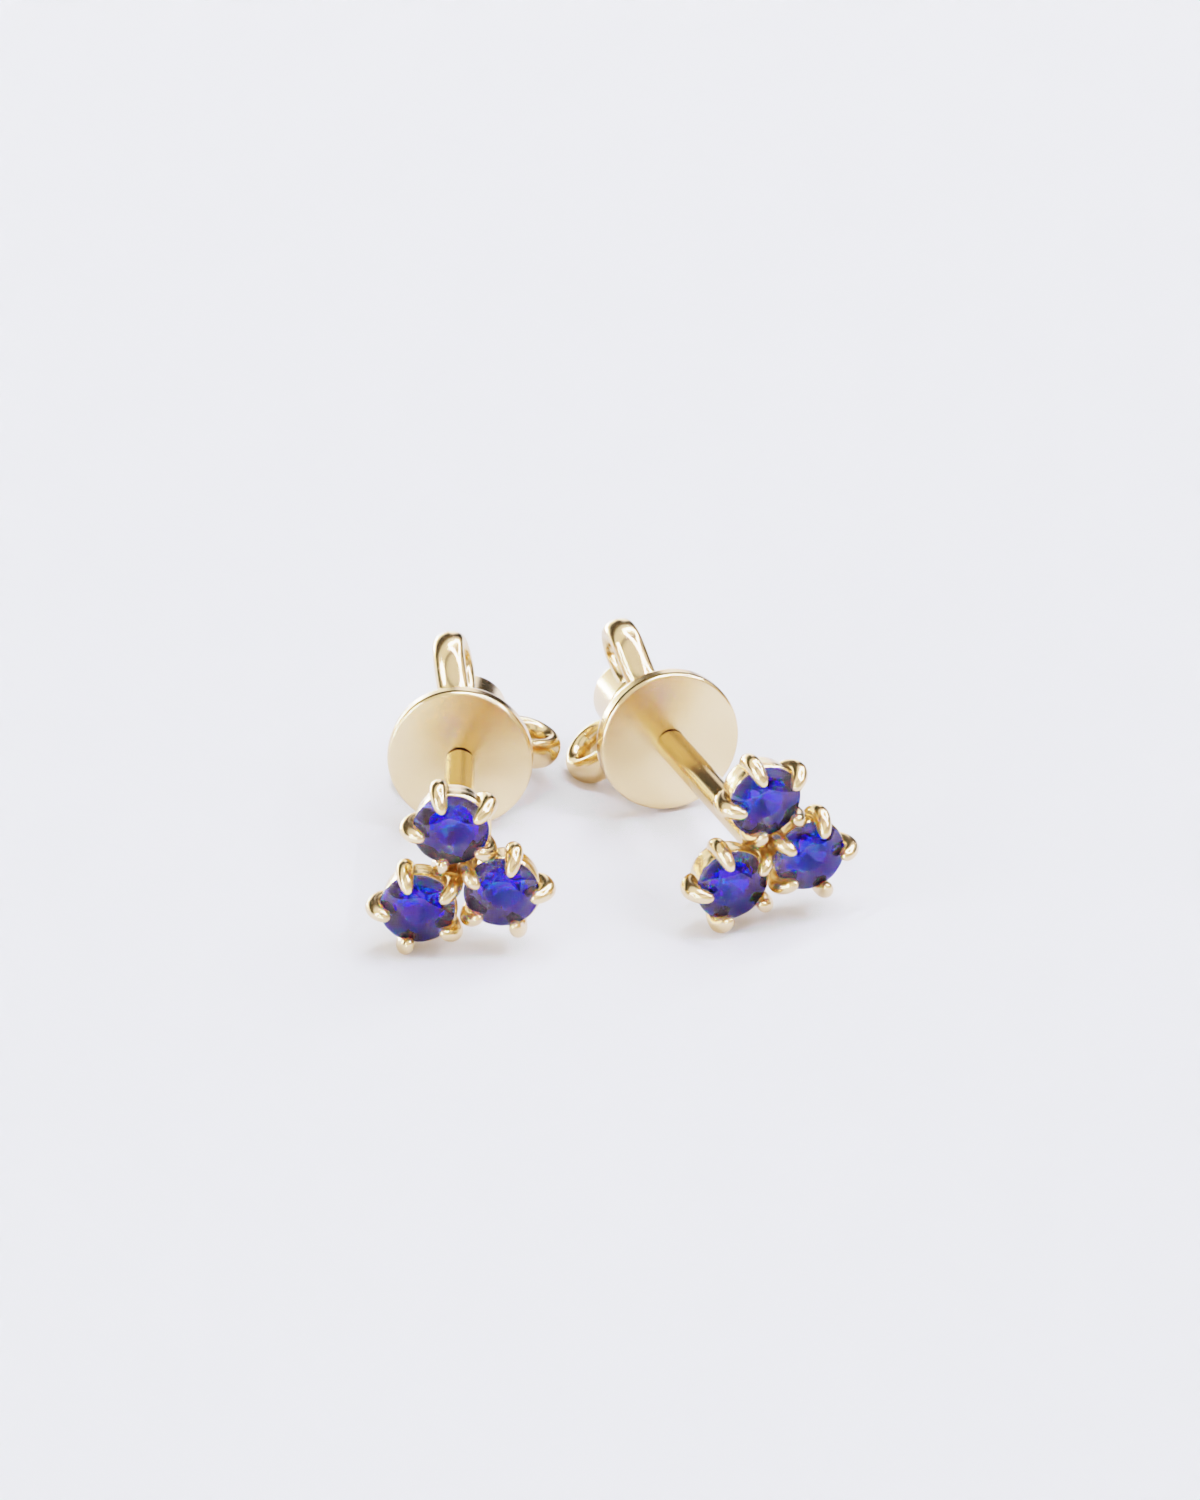 Gold piercing studs with sapphires